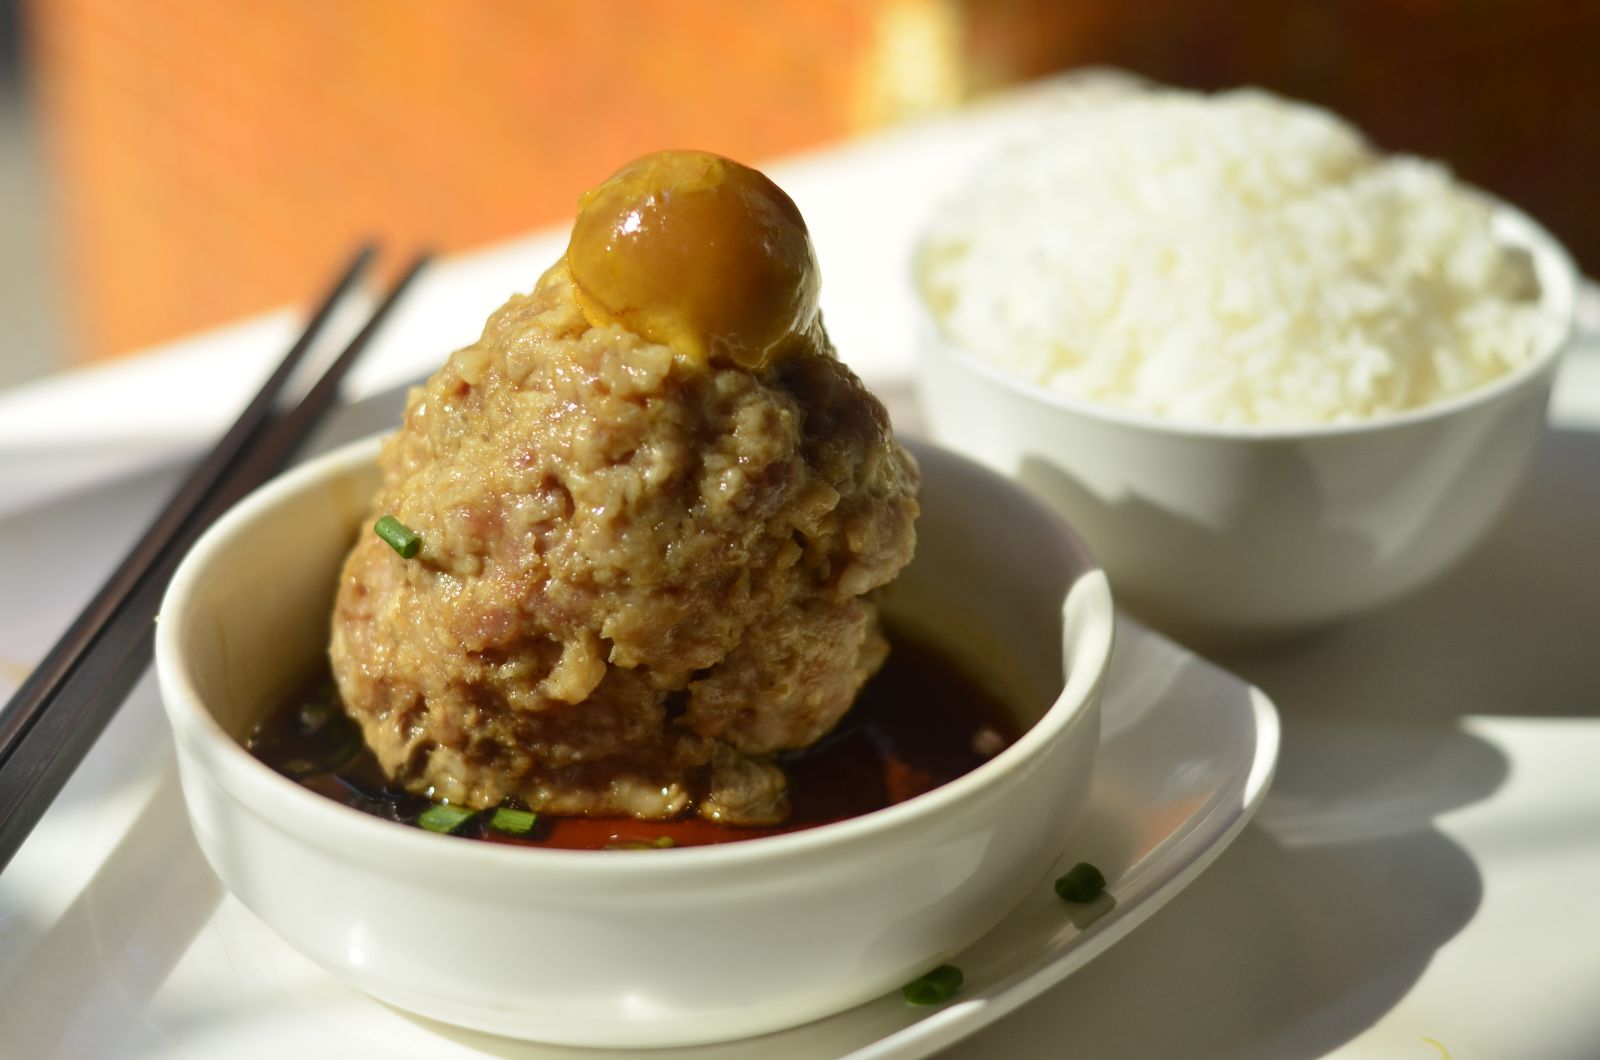 Steamed Pork Patty is a must-try!